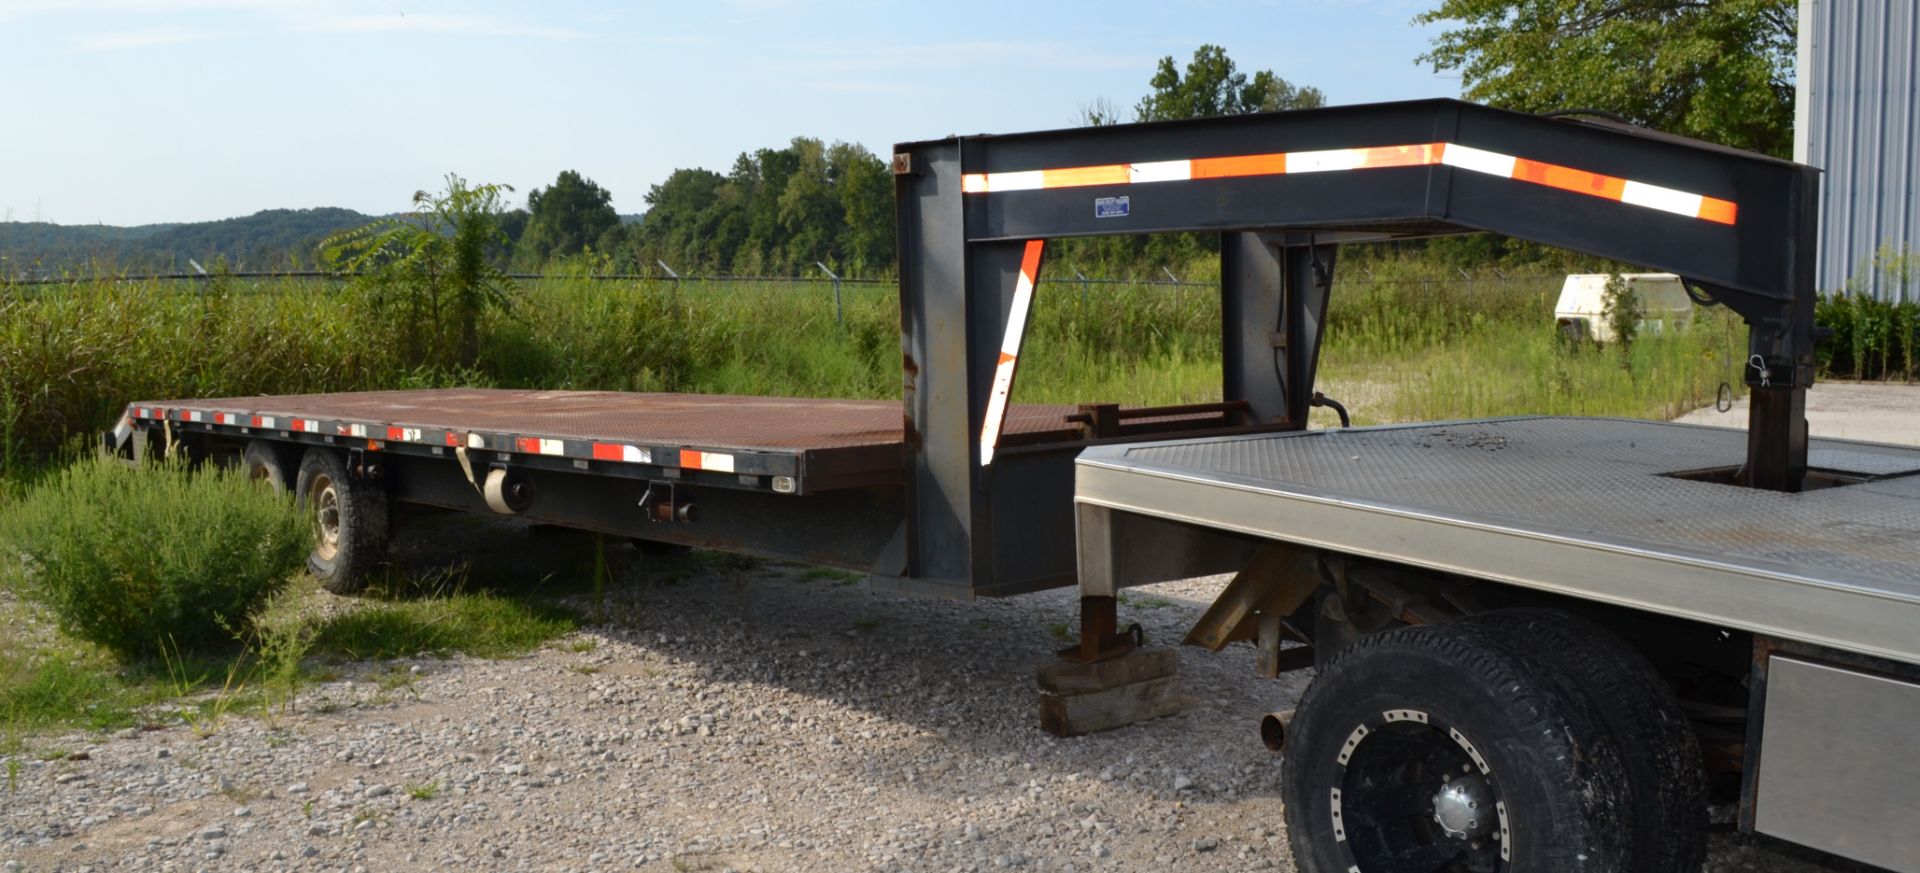 1996 David Utility Trailers 24' Tandem Axle Flatbed Gooseneck Trailer With Dovetail - Image 3 of 5